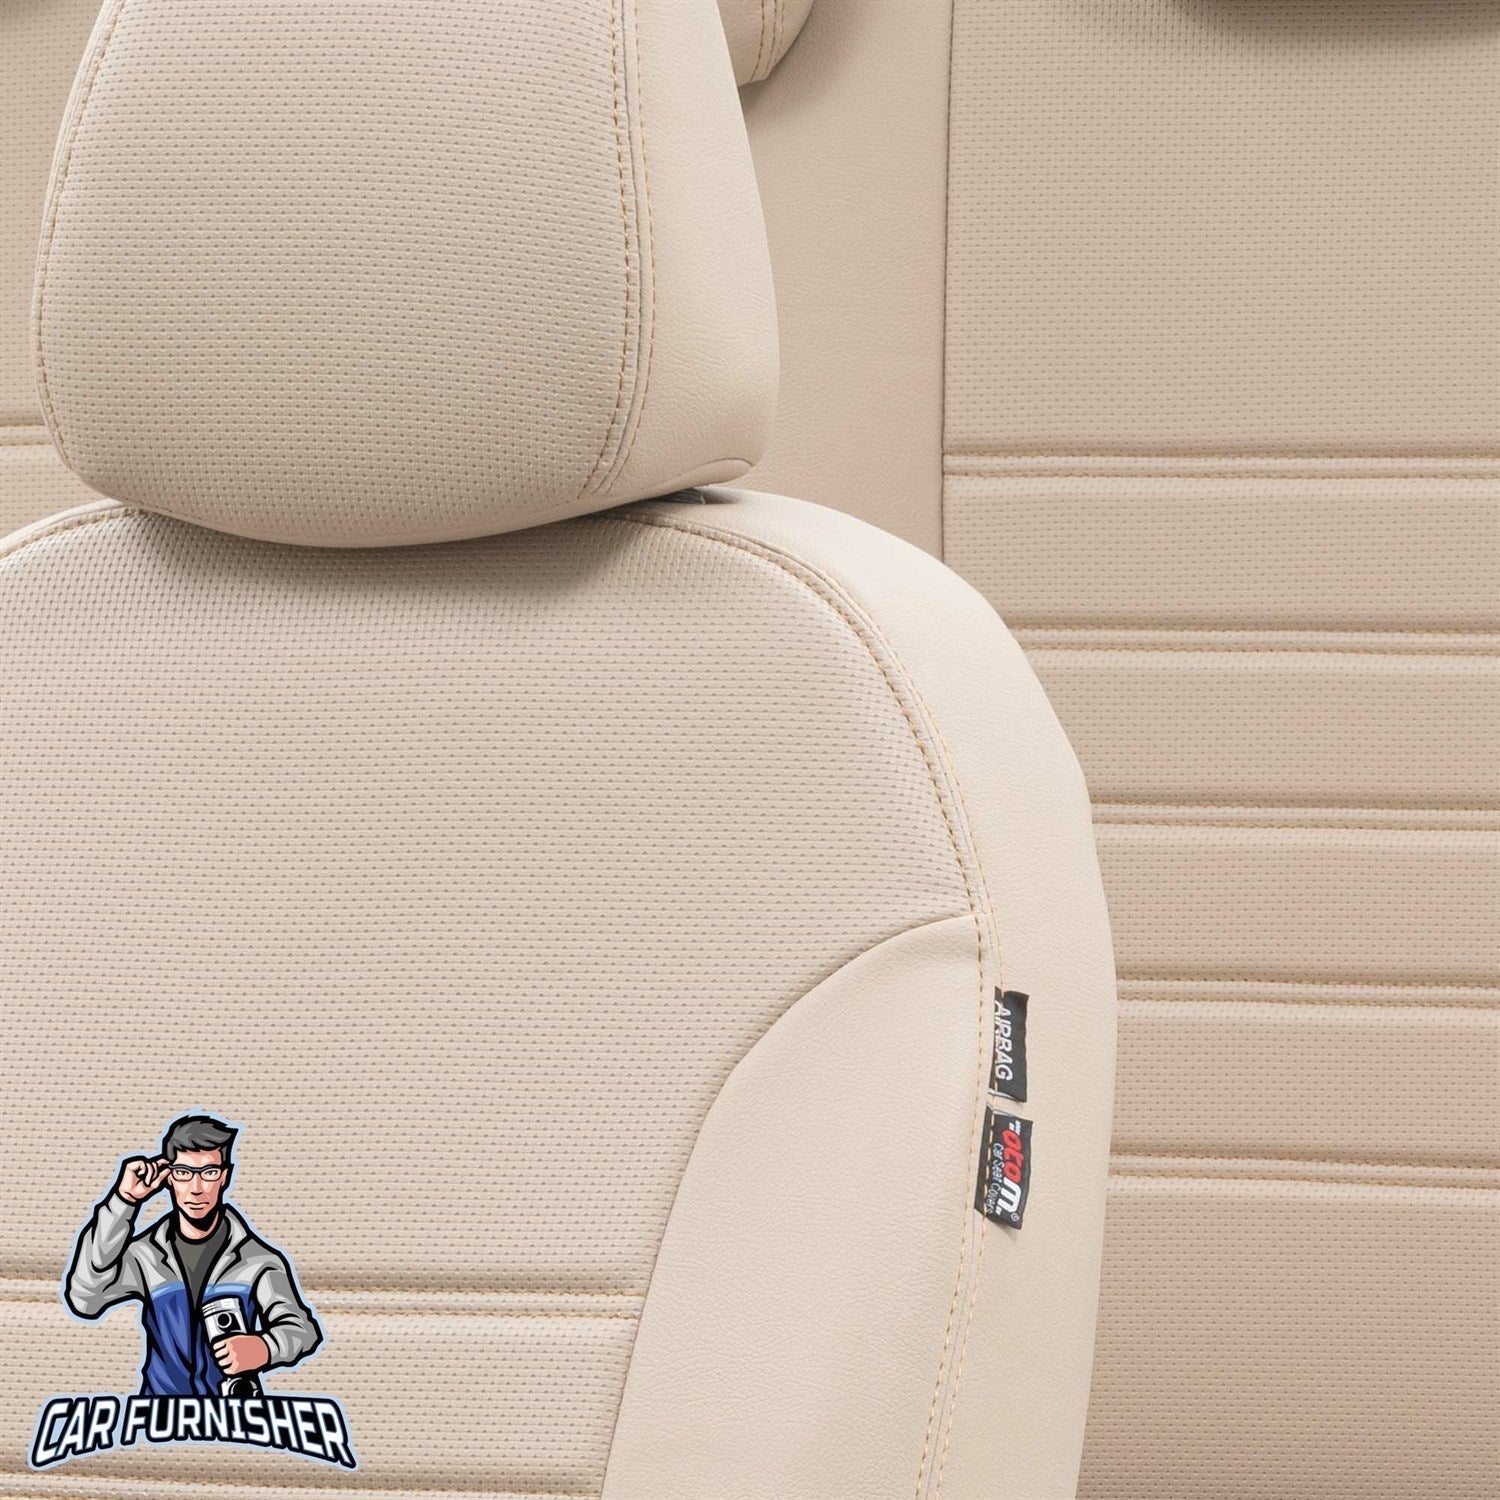 Renault 21 Seat Cover New York Leather Design Beige Leather